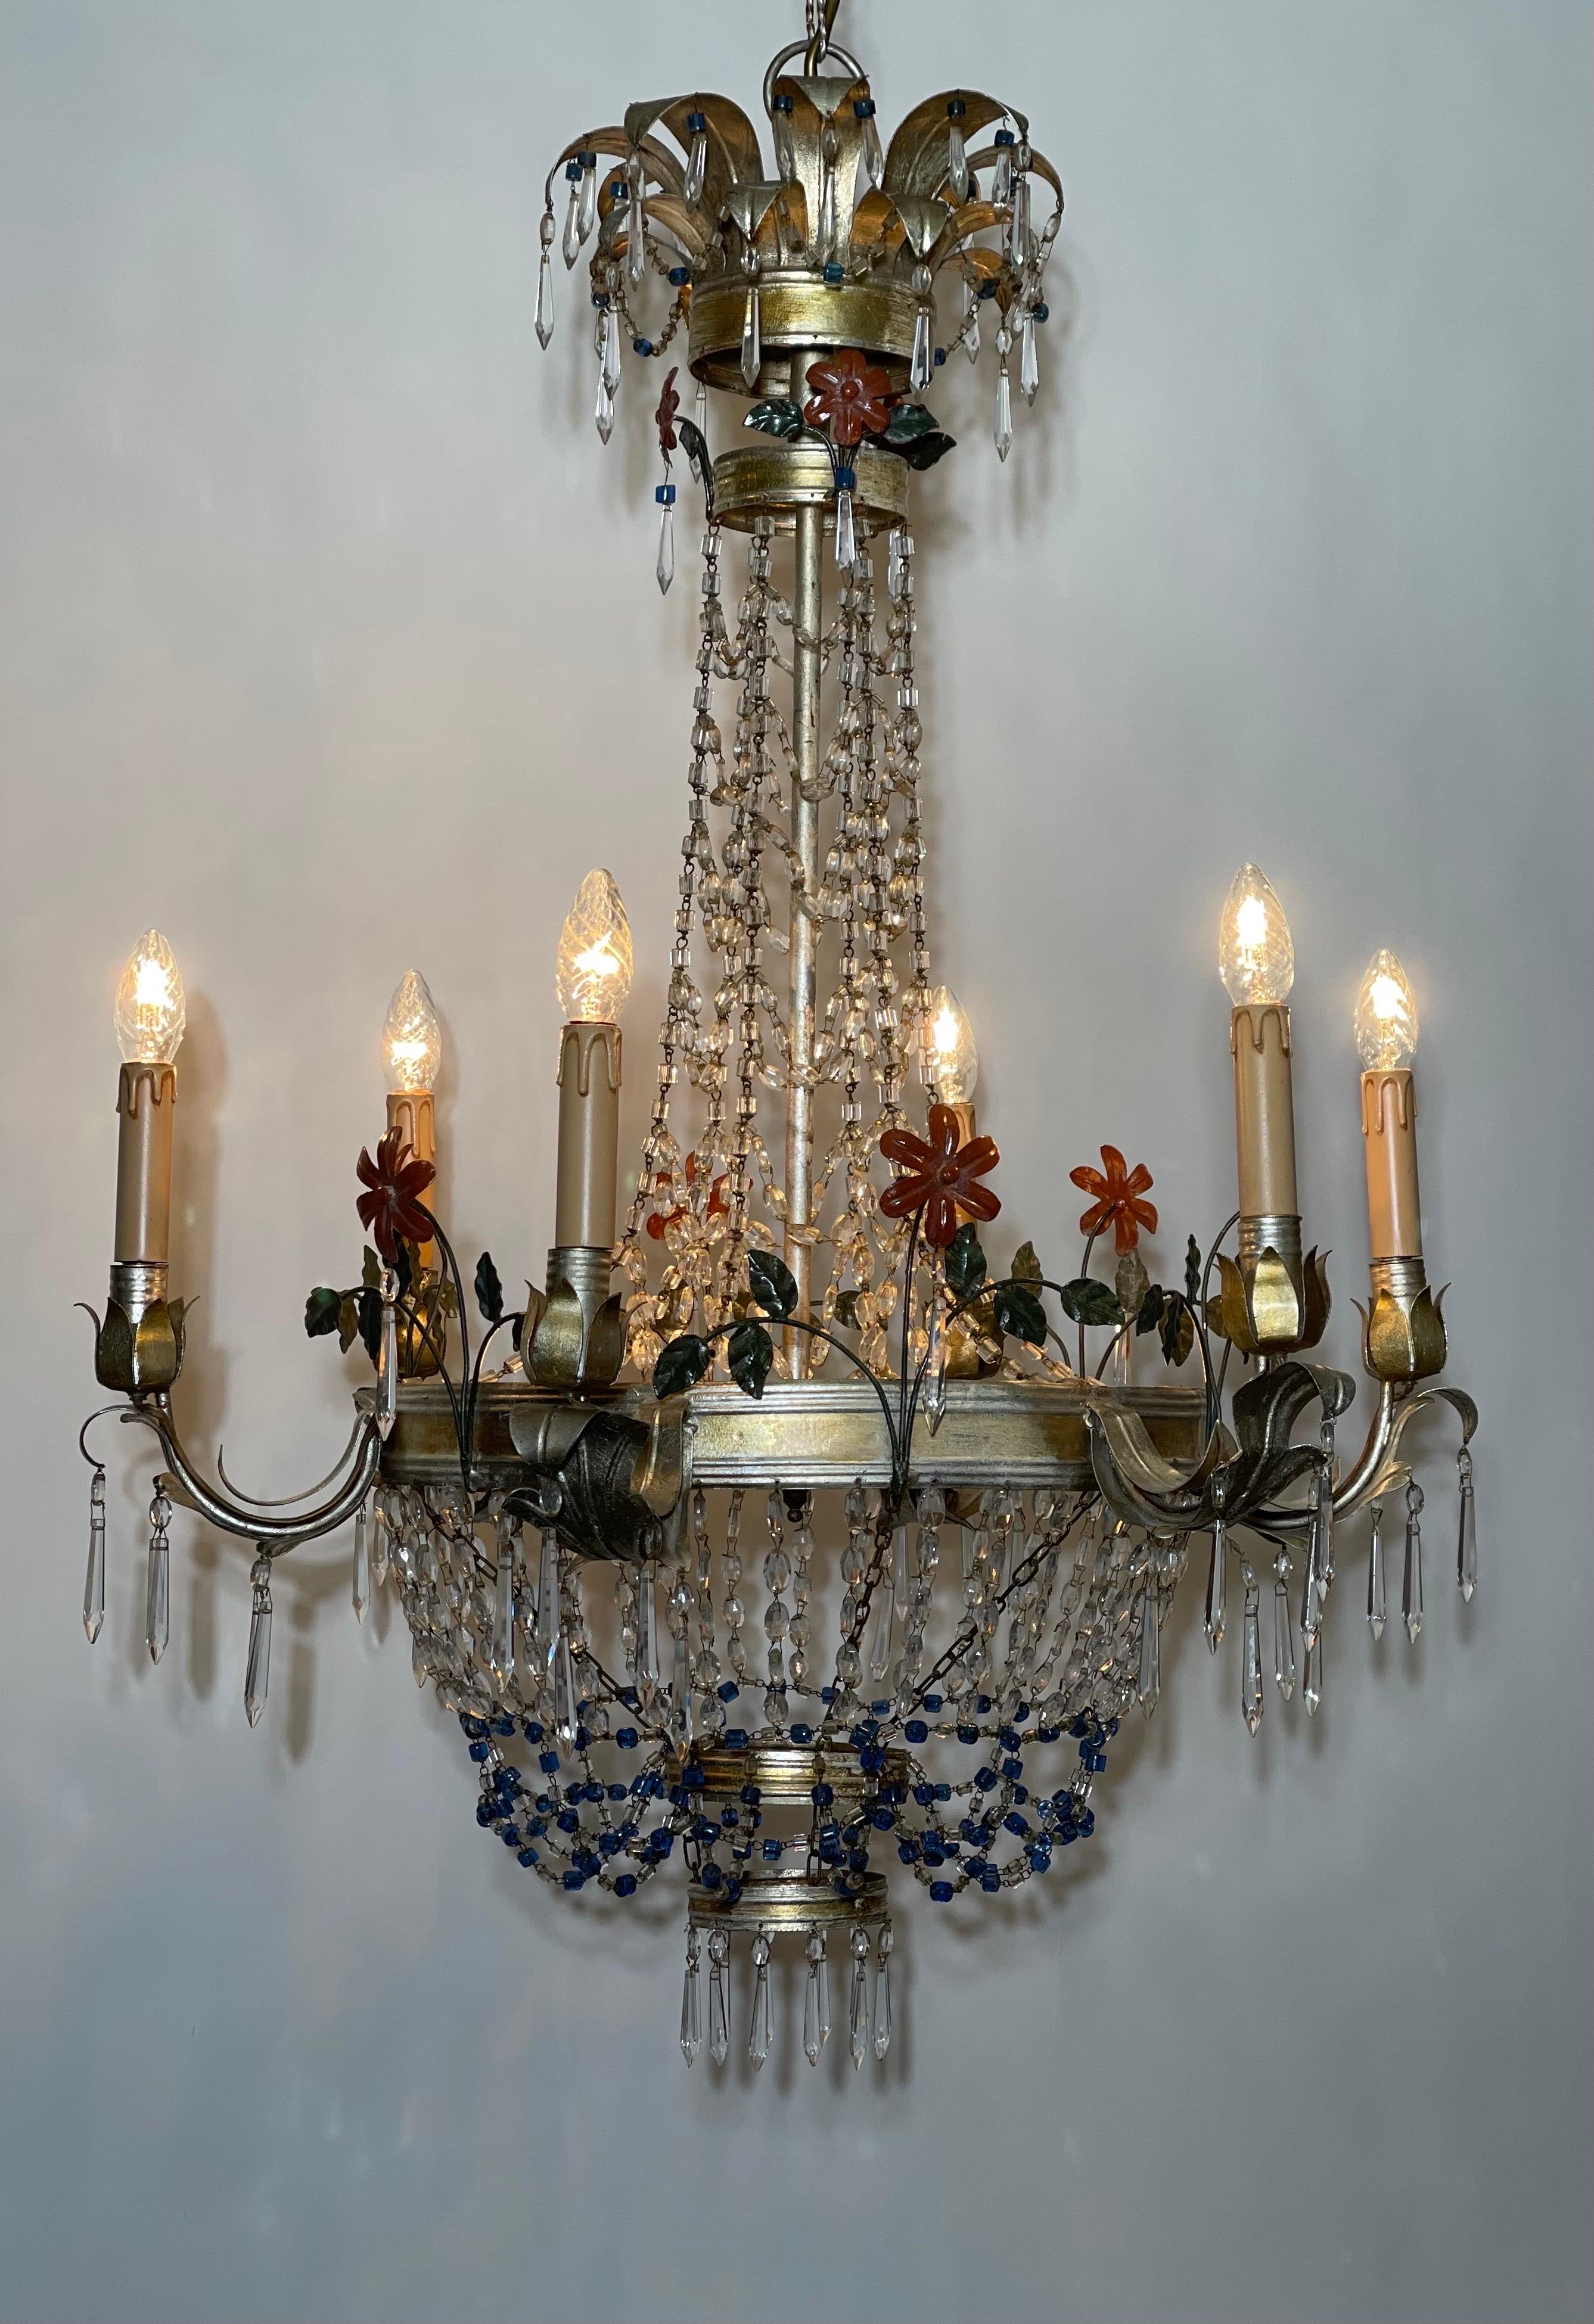 A beautiful, large Regency style Italian silvered iron and crystal chandelier, circa 1960s.
Decorated with colorful flowers and blue crystal pendants.
Measurements: height of the fixture only 41.33 inches, totally height 80.70 inches (with chain